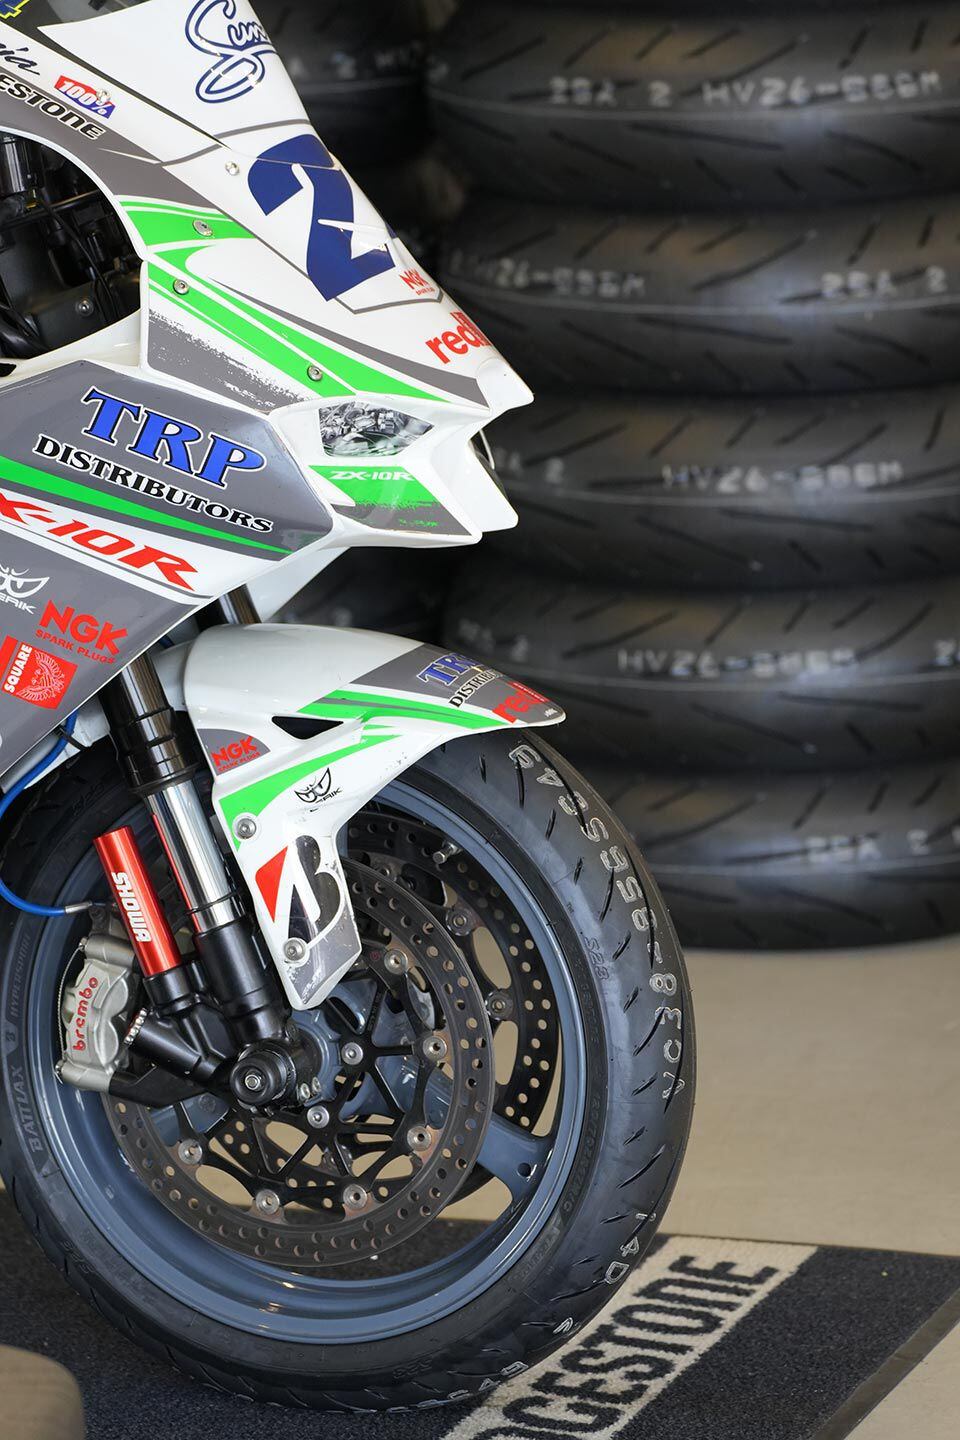 Although not a racing tire, the Battlax S23 offers plenty of long-lasting grip for more than one trackday event.